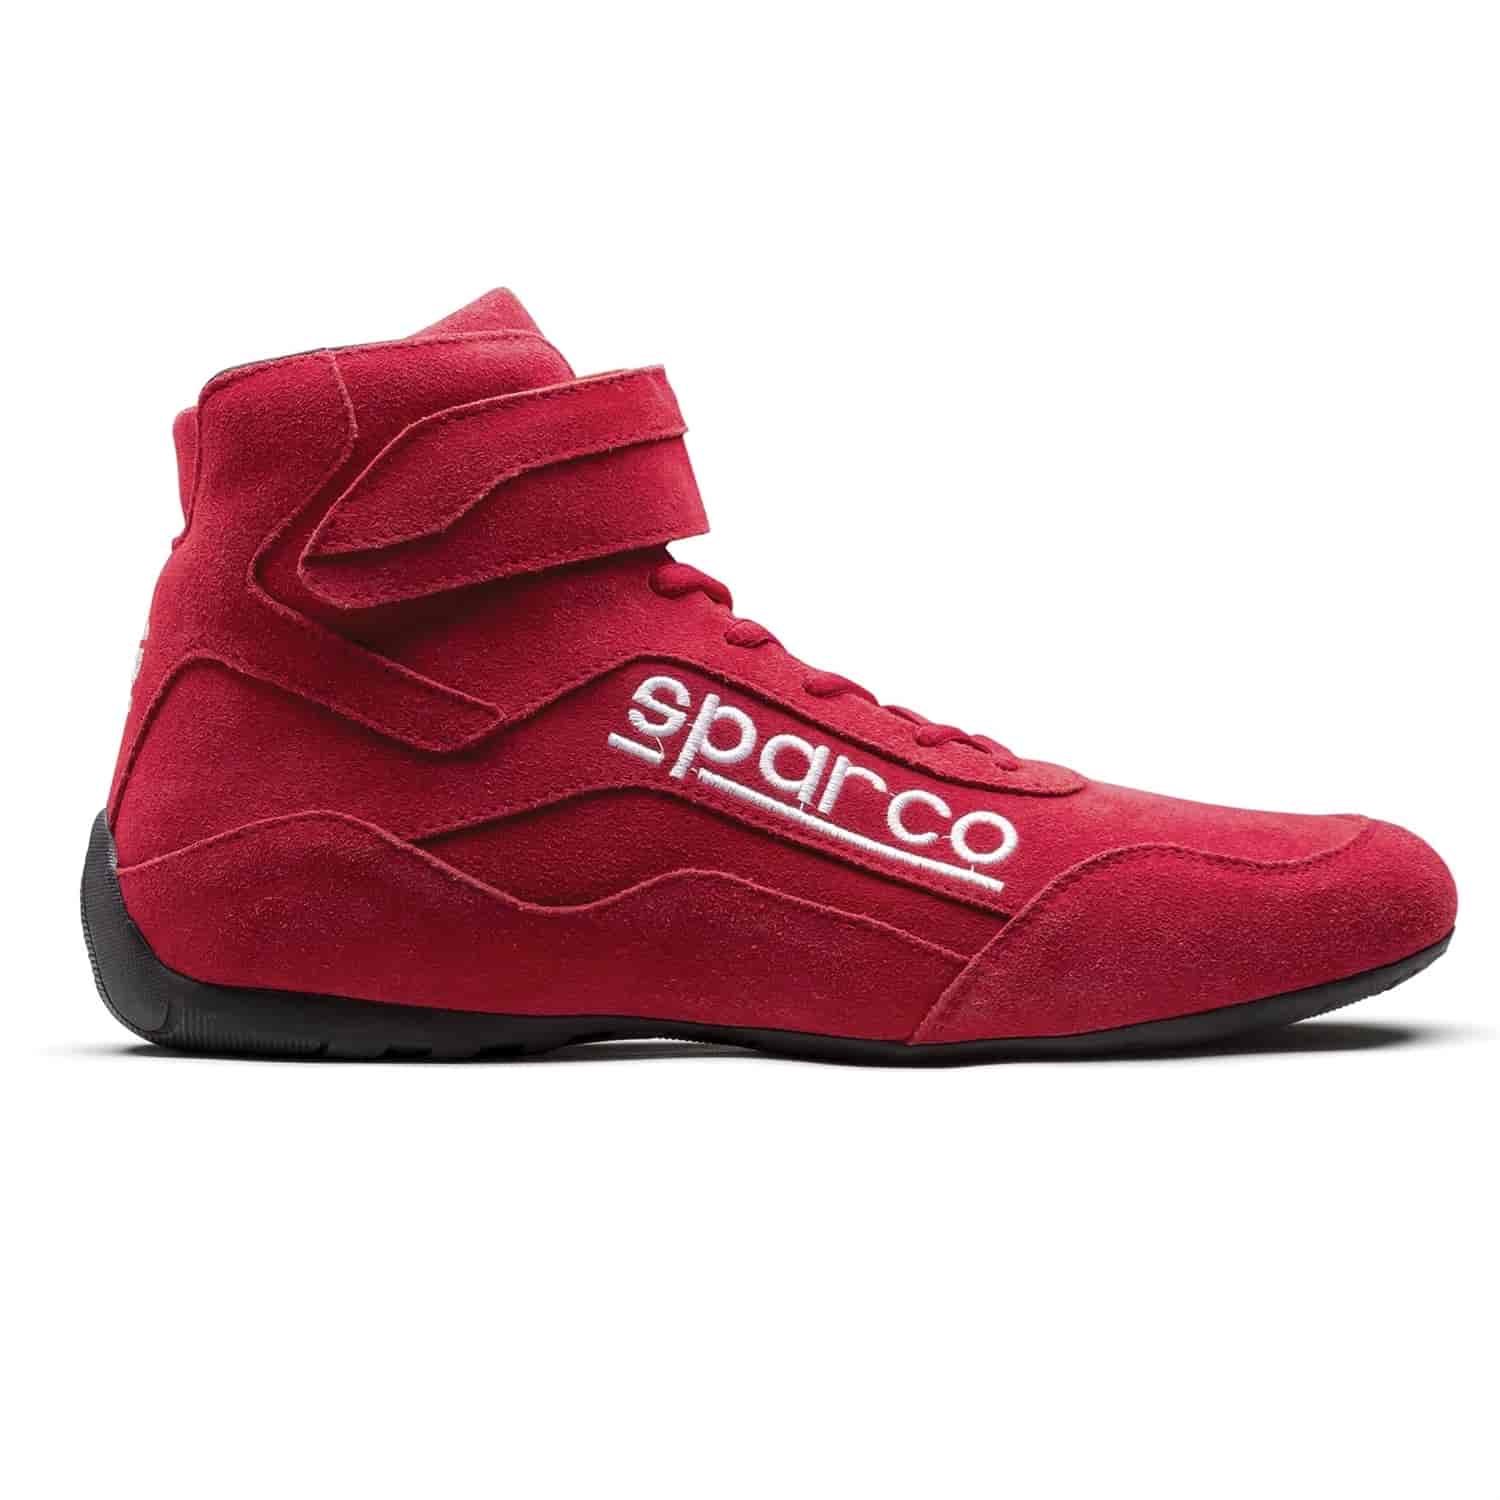 Race 2 Shoe Size 7 - Red